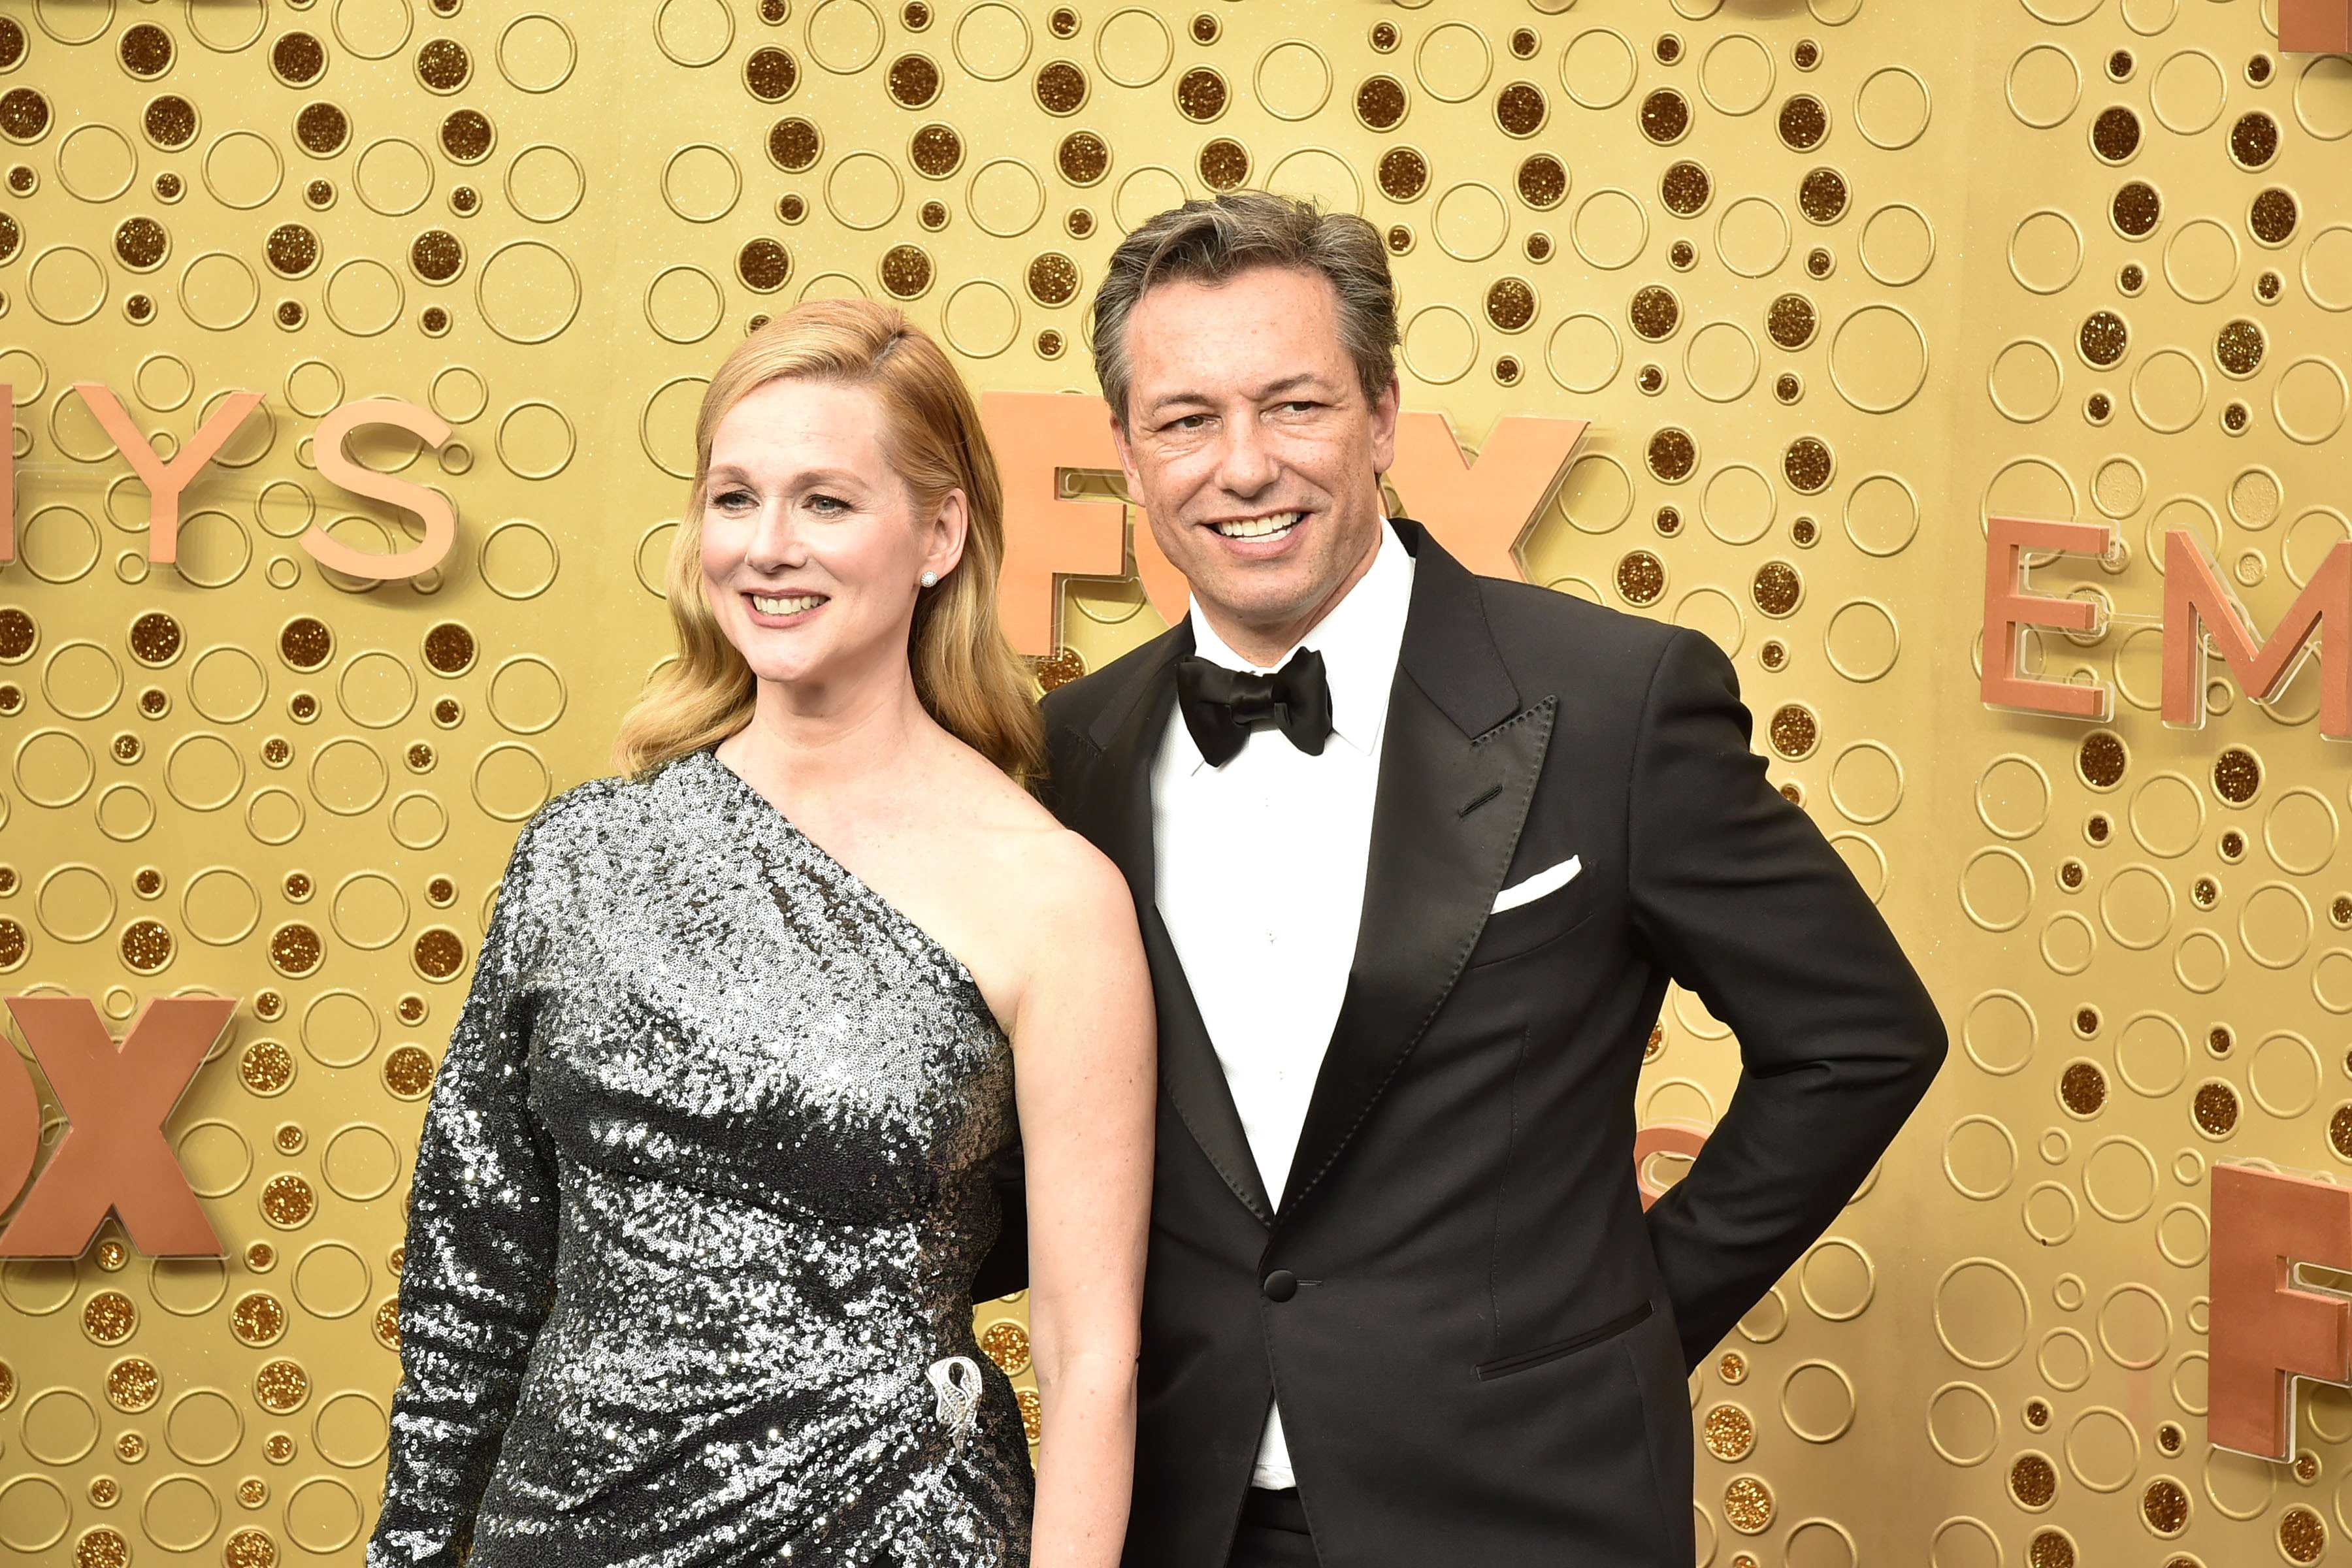 Laura Linney and Marc Schauer at the Emmy Awards on September 22, 2019, in Los Angeles. | Source: Getty Images